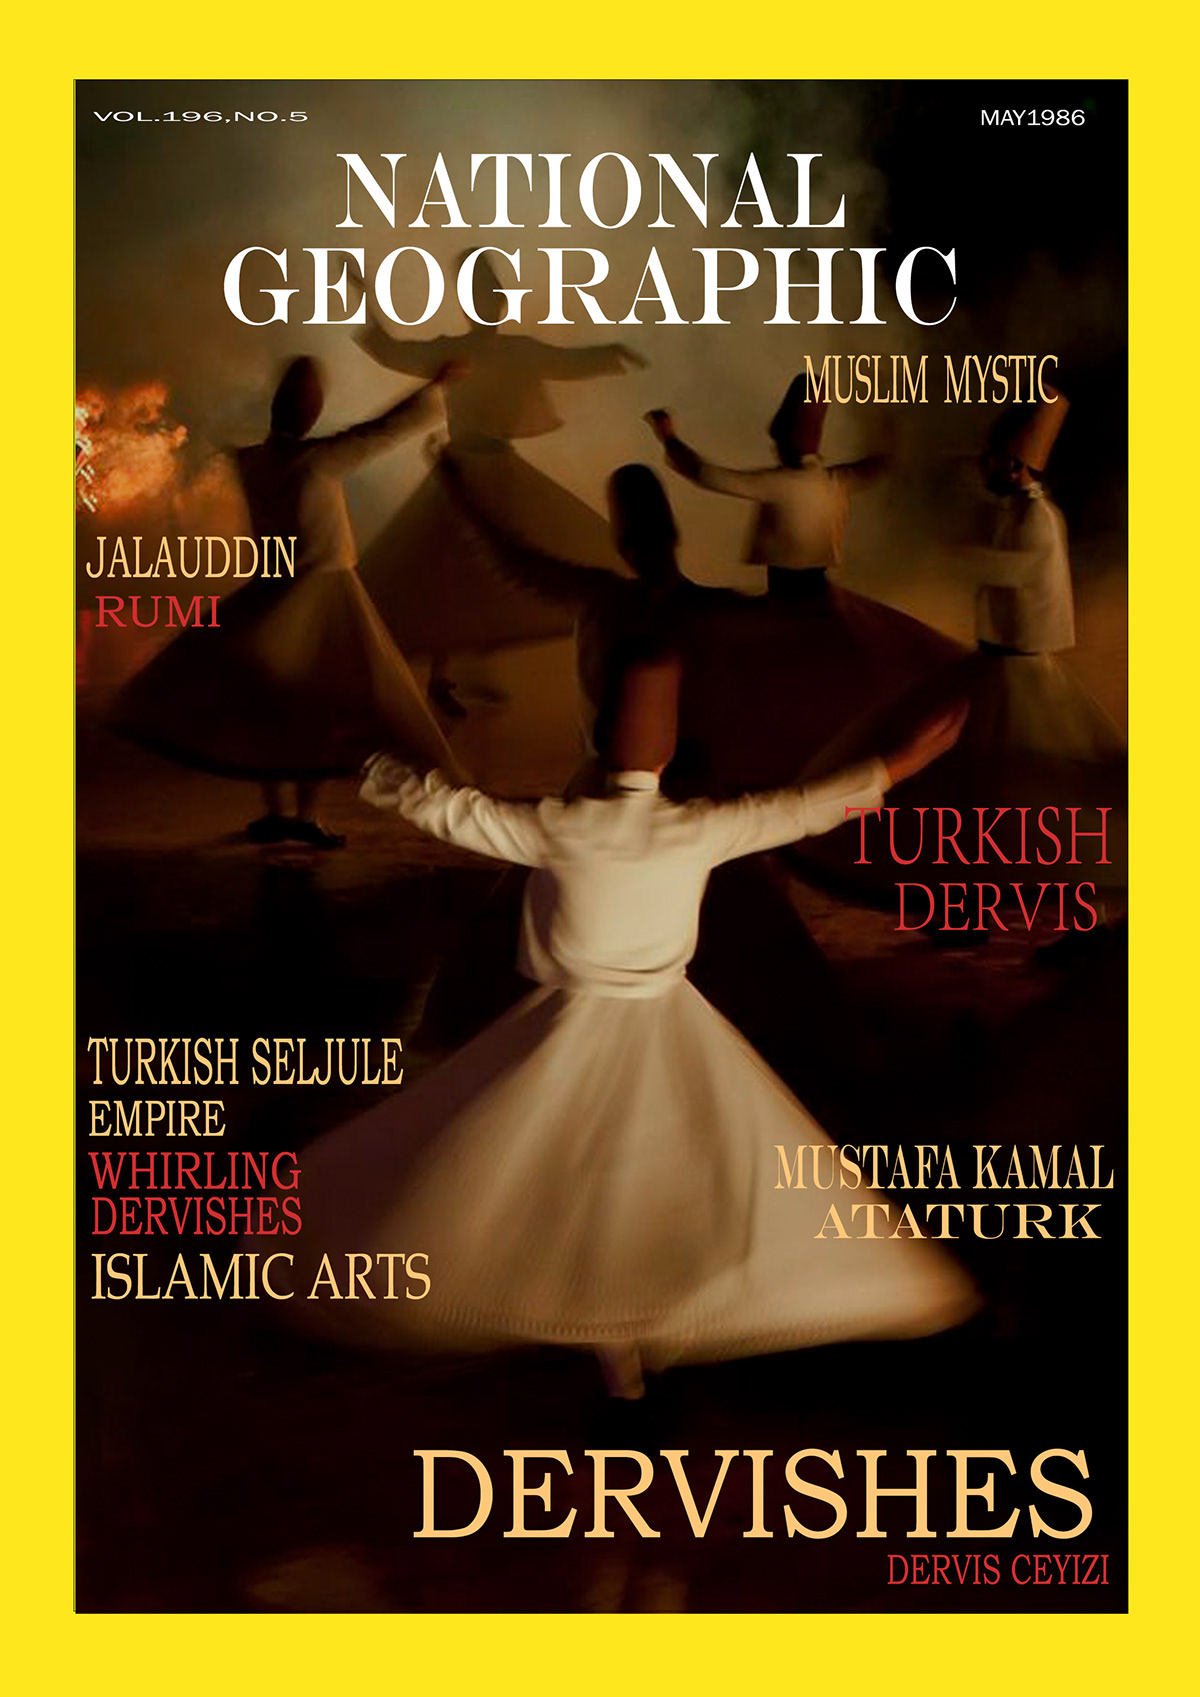 cover Dervish Dervishes magazine typography   national geographic